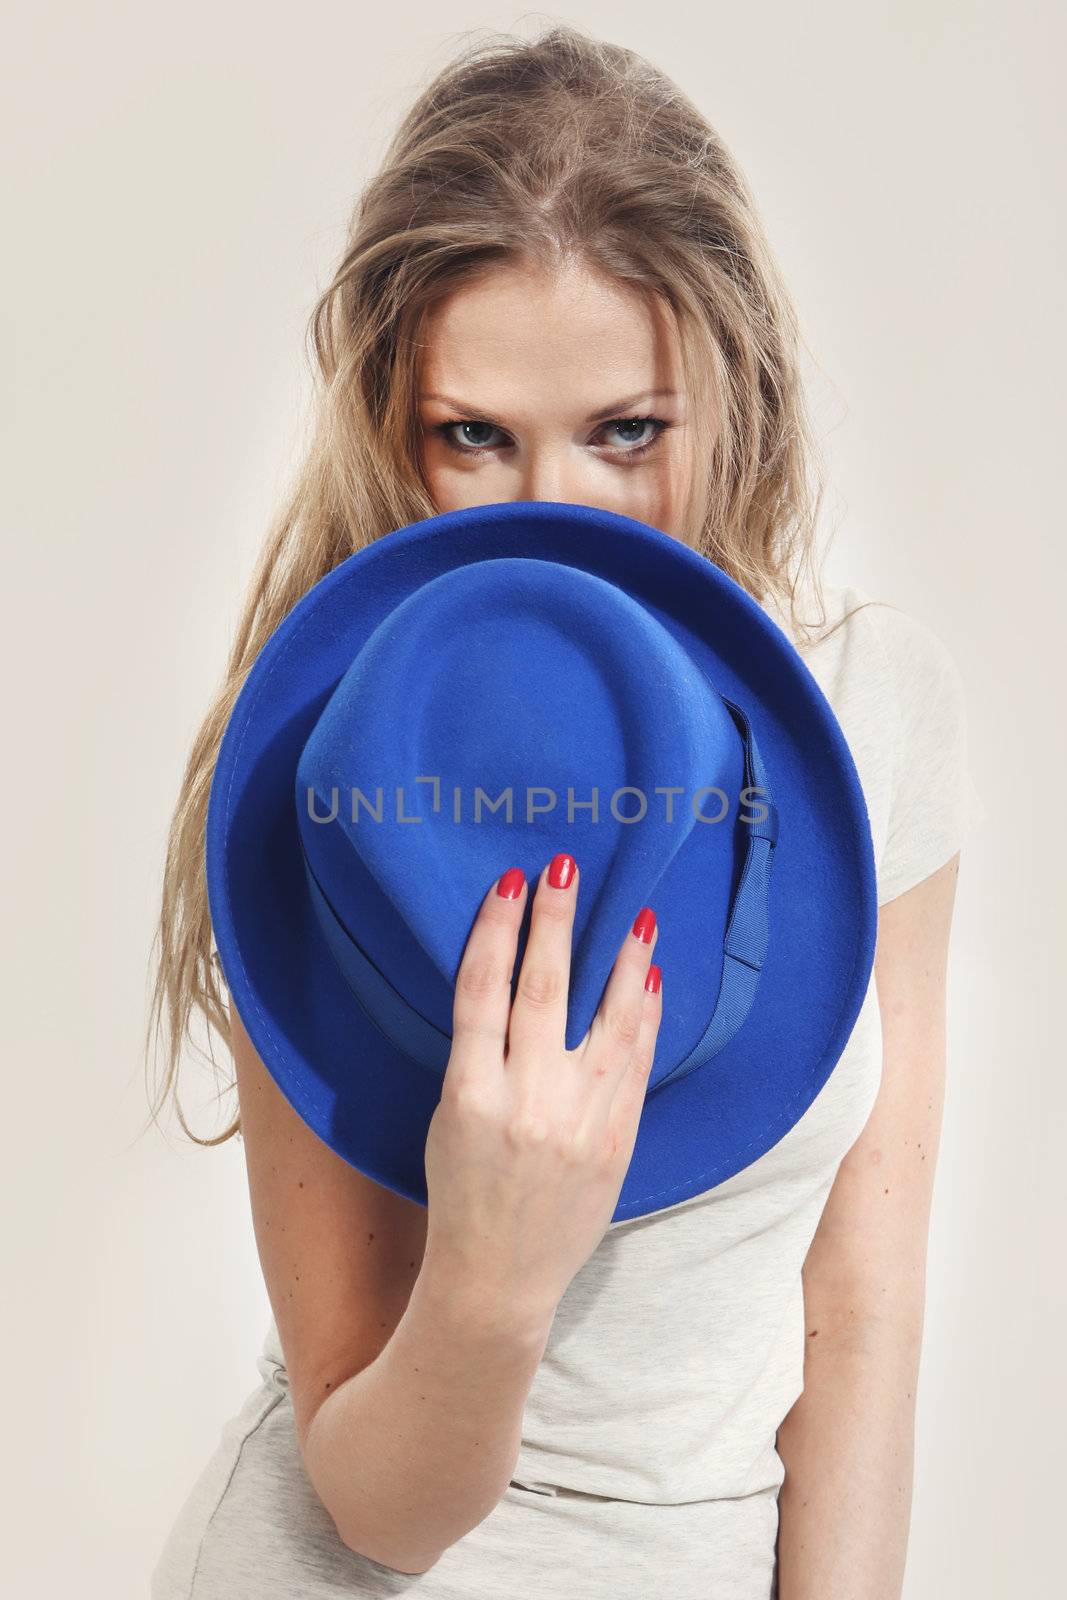 Beautiful girl holding a blue hat by robert_przybysz